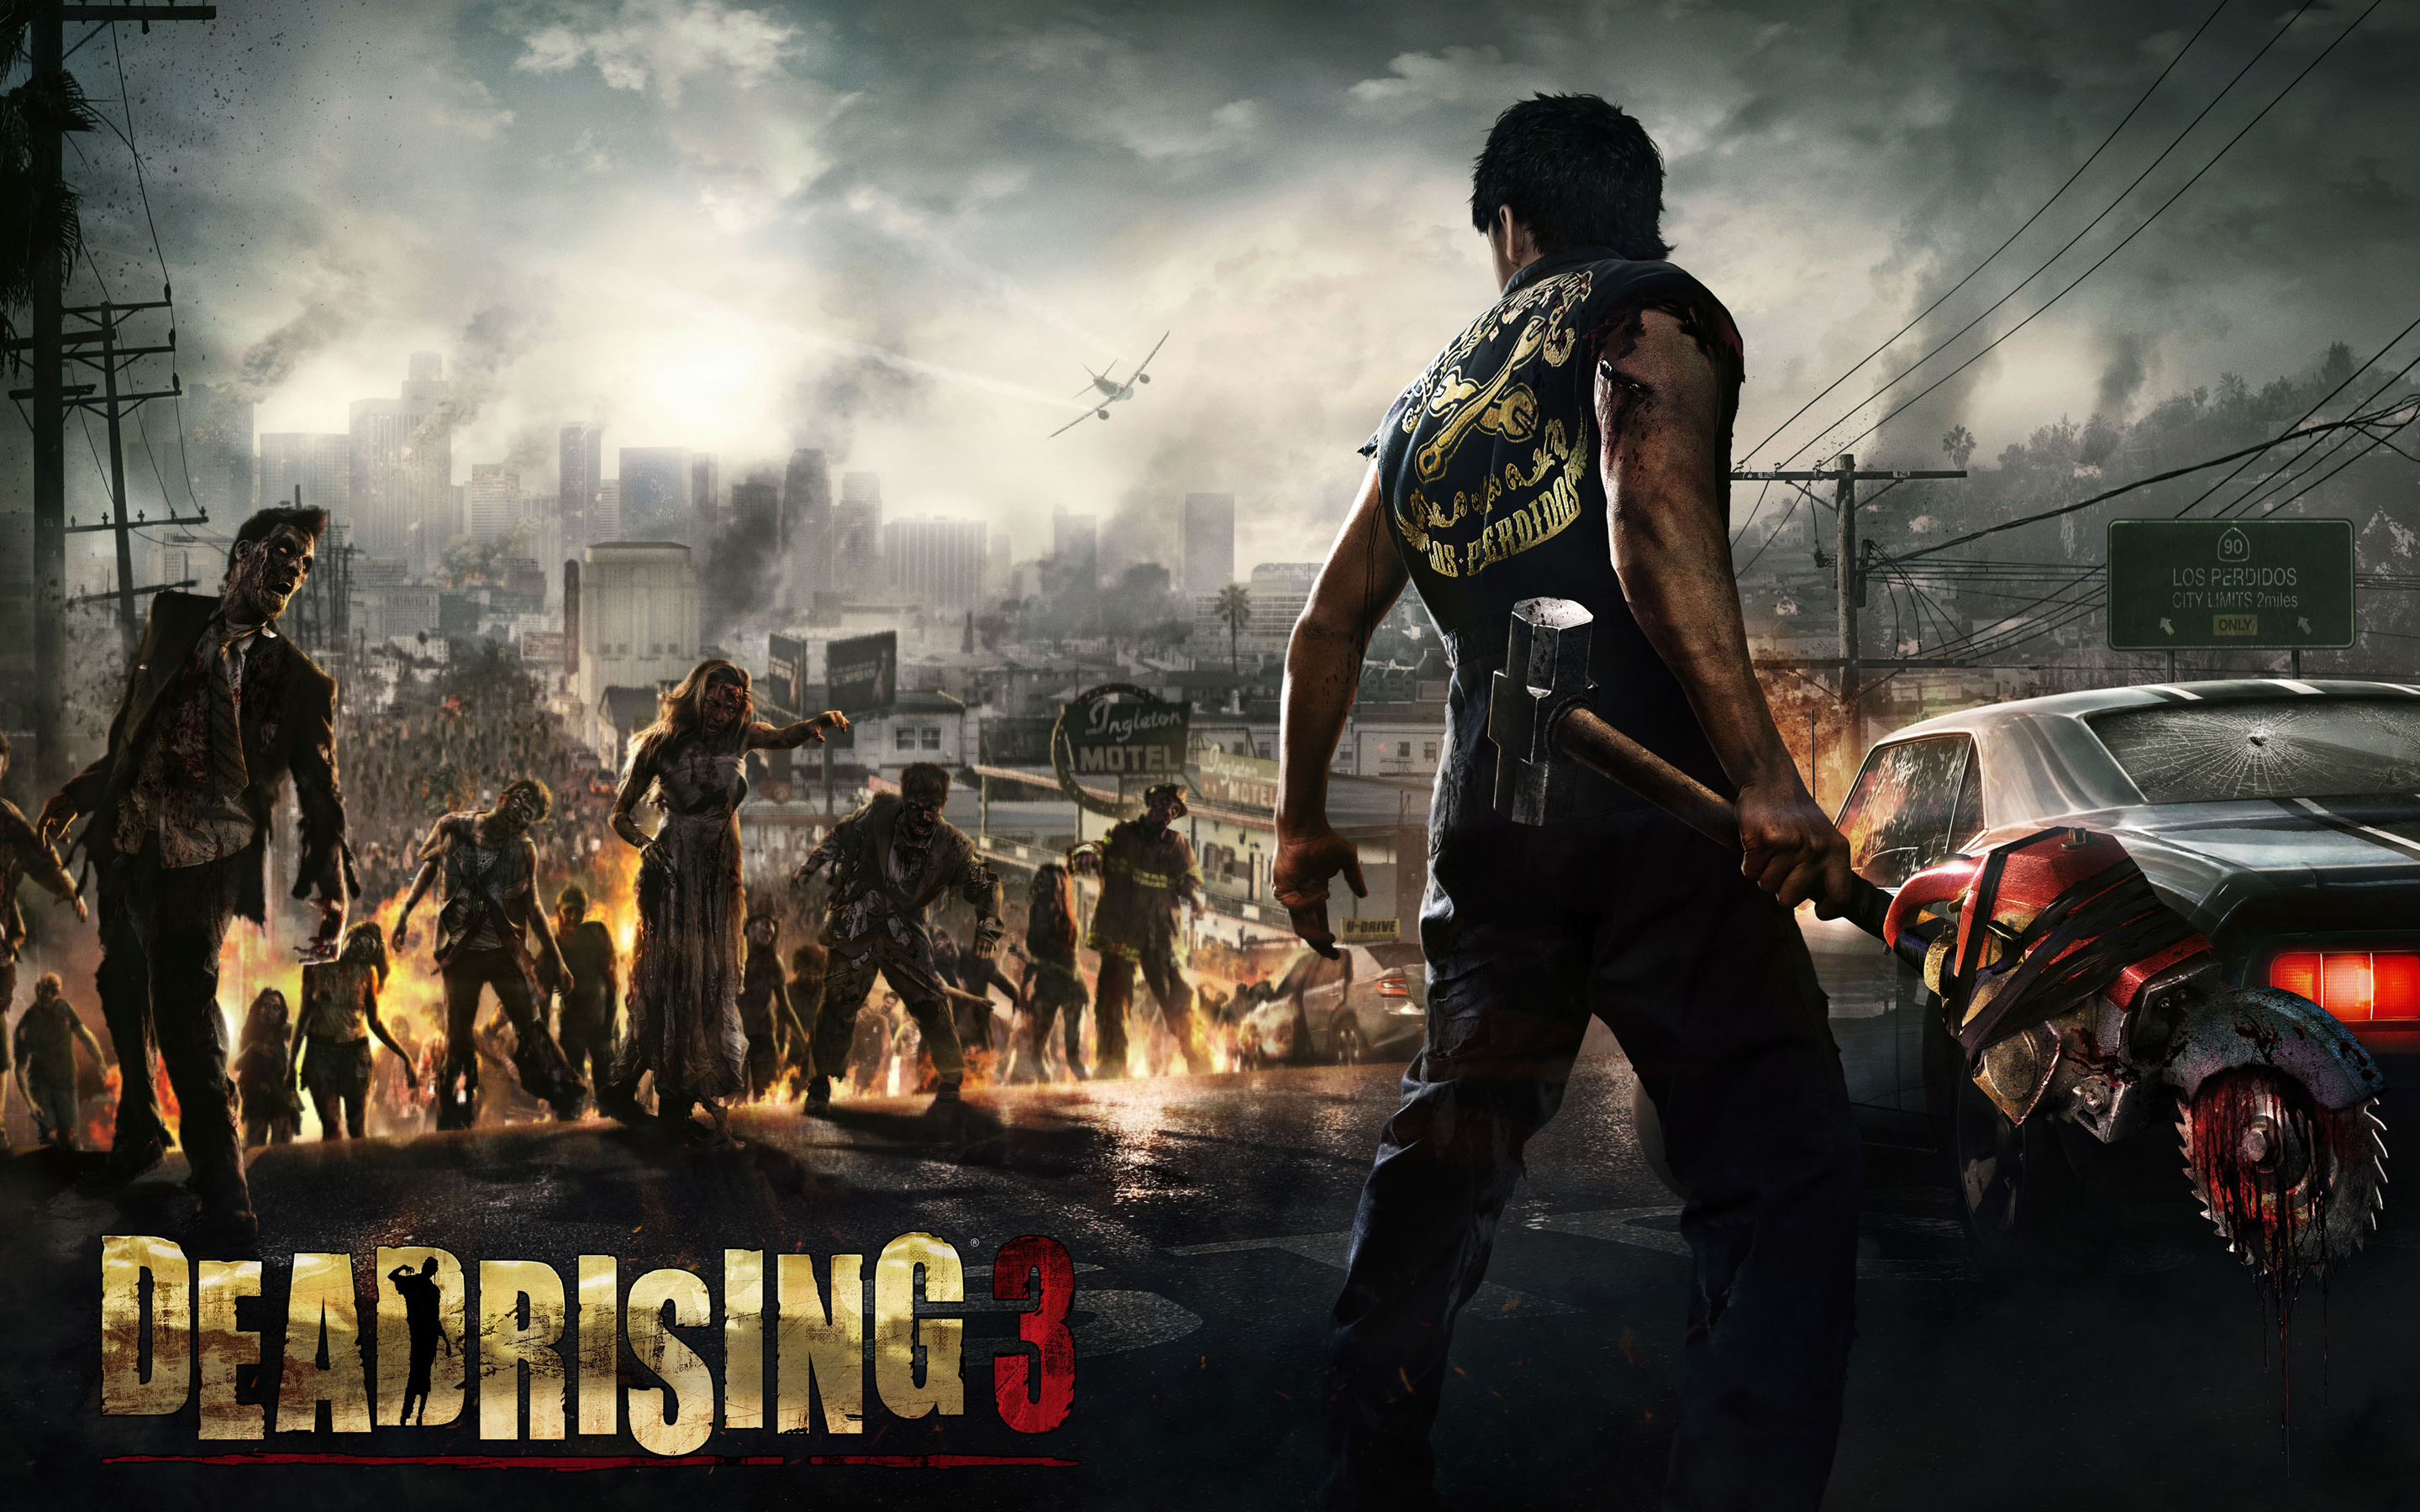 dead rising 4 wallpaper,action adventure game,pc game,shooter game,movie,action film